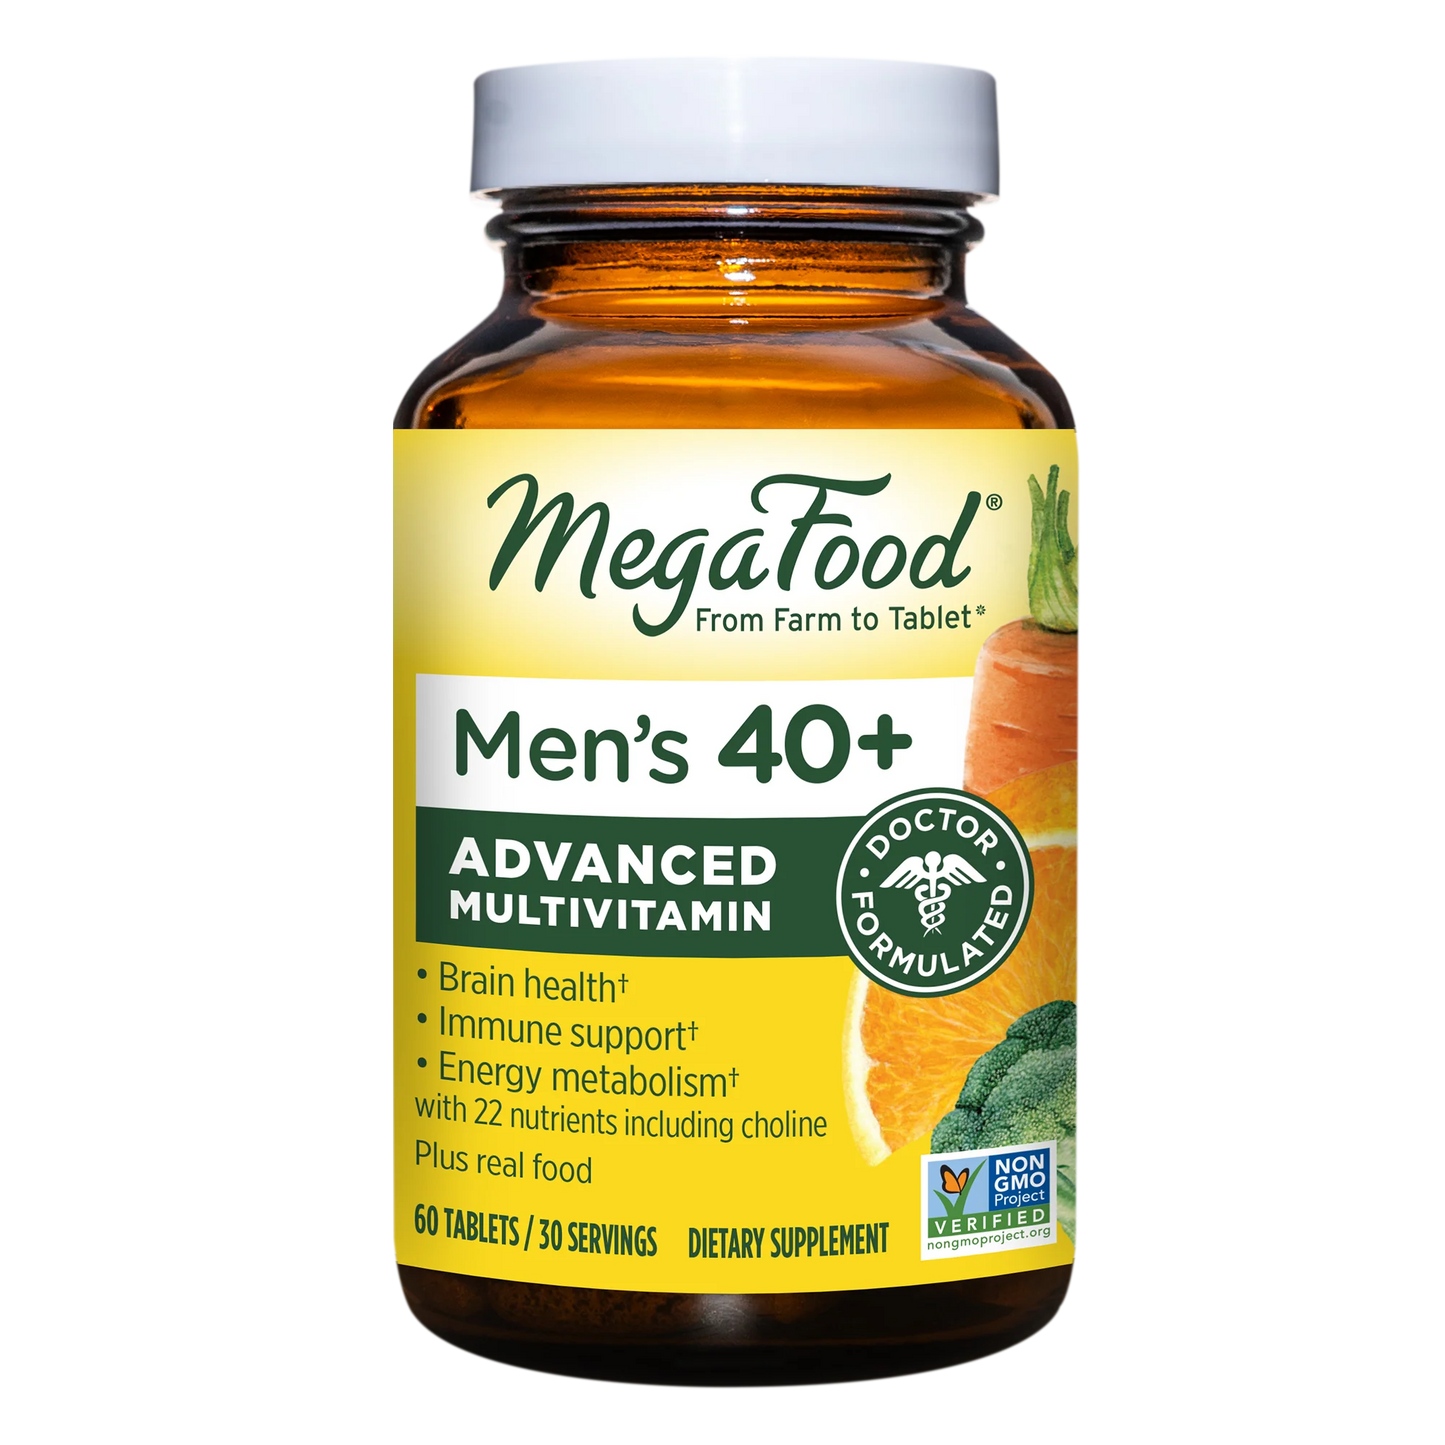 MEN'S ONE DAILY 40+ MULTI 30TABS MEGAFOOD